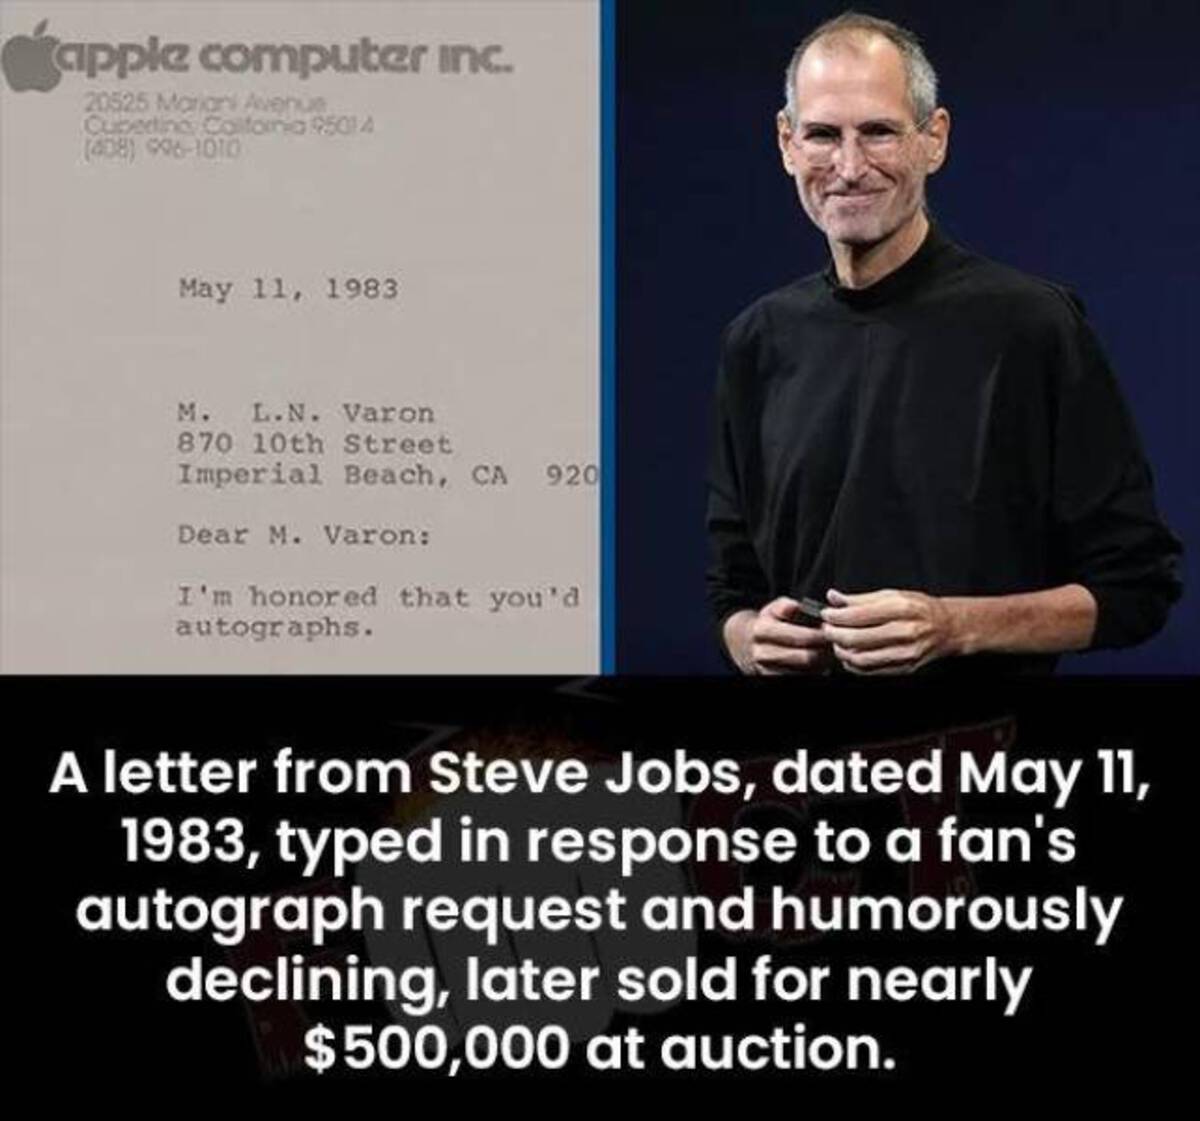 screenshot - apple computer inc. 20525 Mariani Avenue Cupertino, California 95014 408 996 M. L.N. Varon 870 10th Street Imperial Beach, Ca 920 Dear M. Varon I'm honored that you'd autographs. A letter from Steve Jobs, dated , typed in response to a fan's 